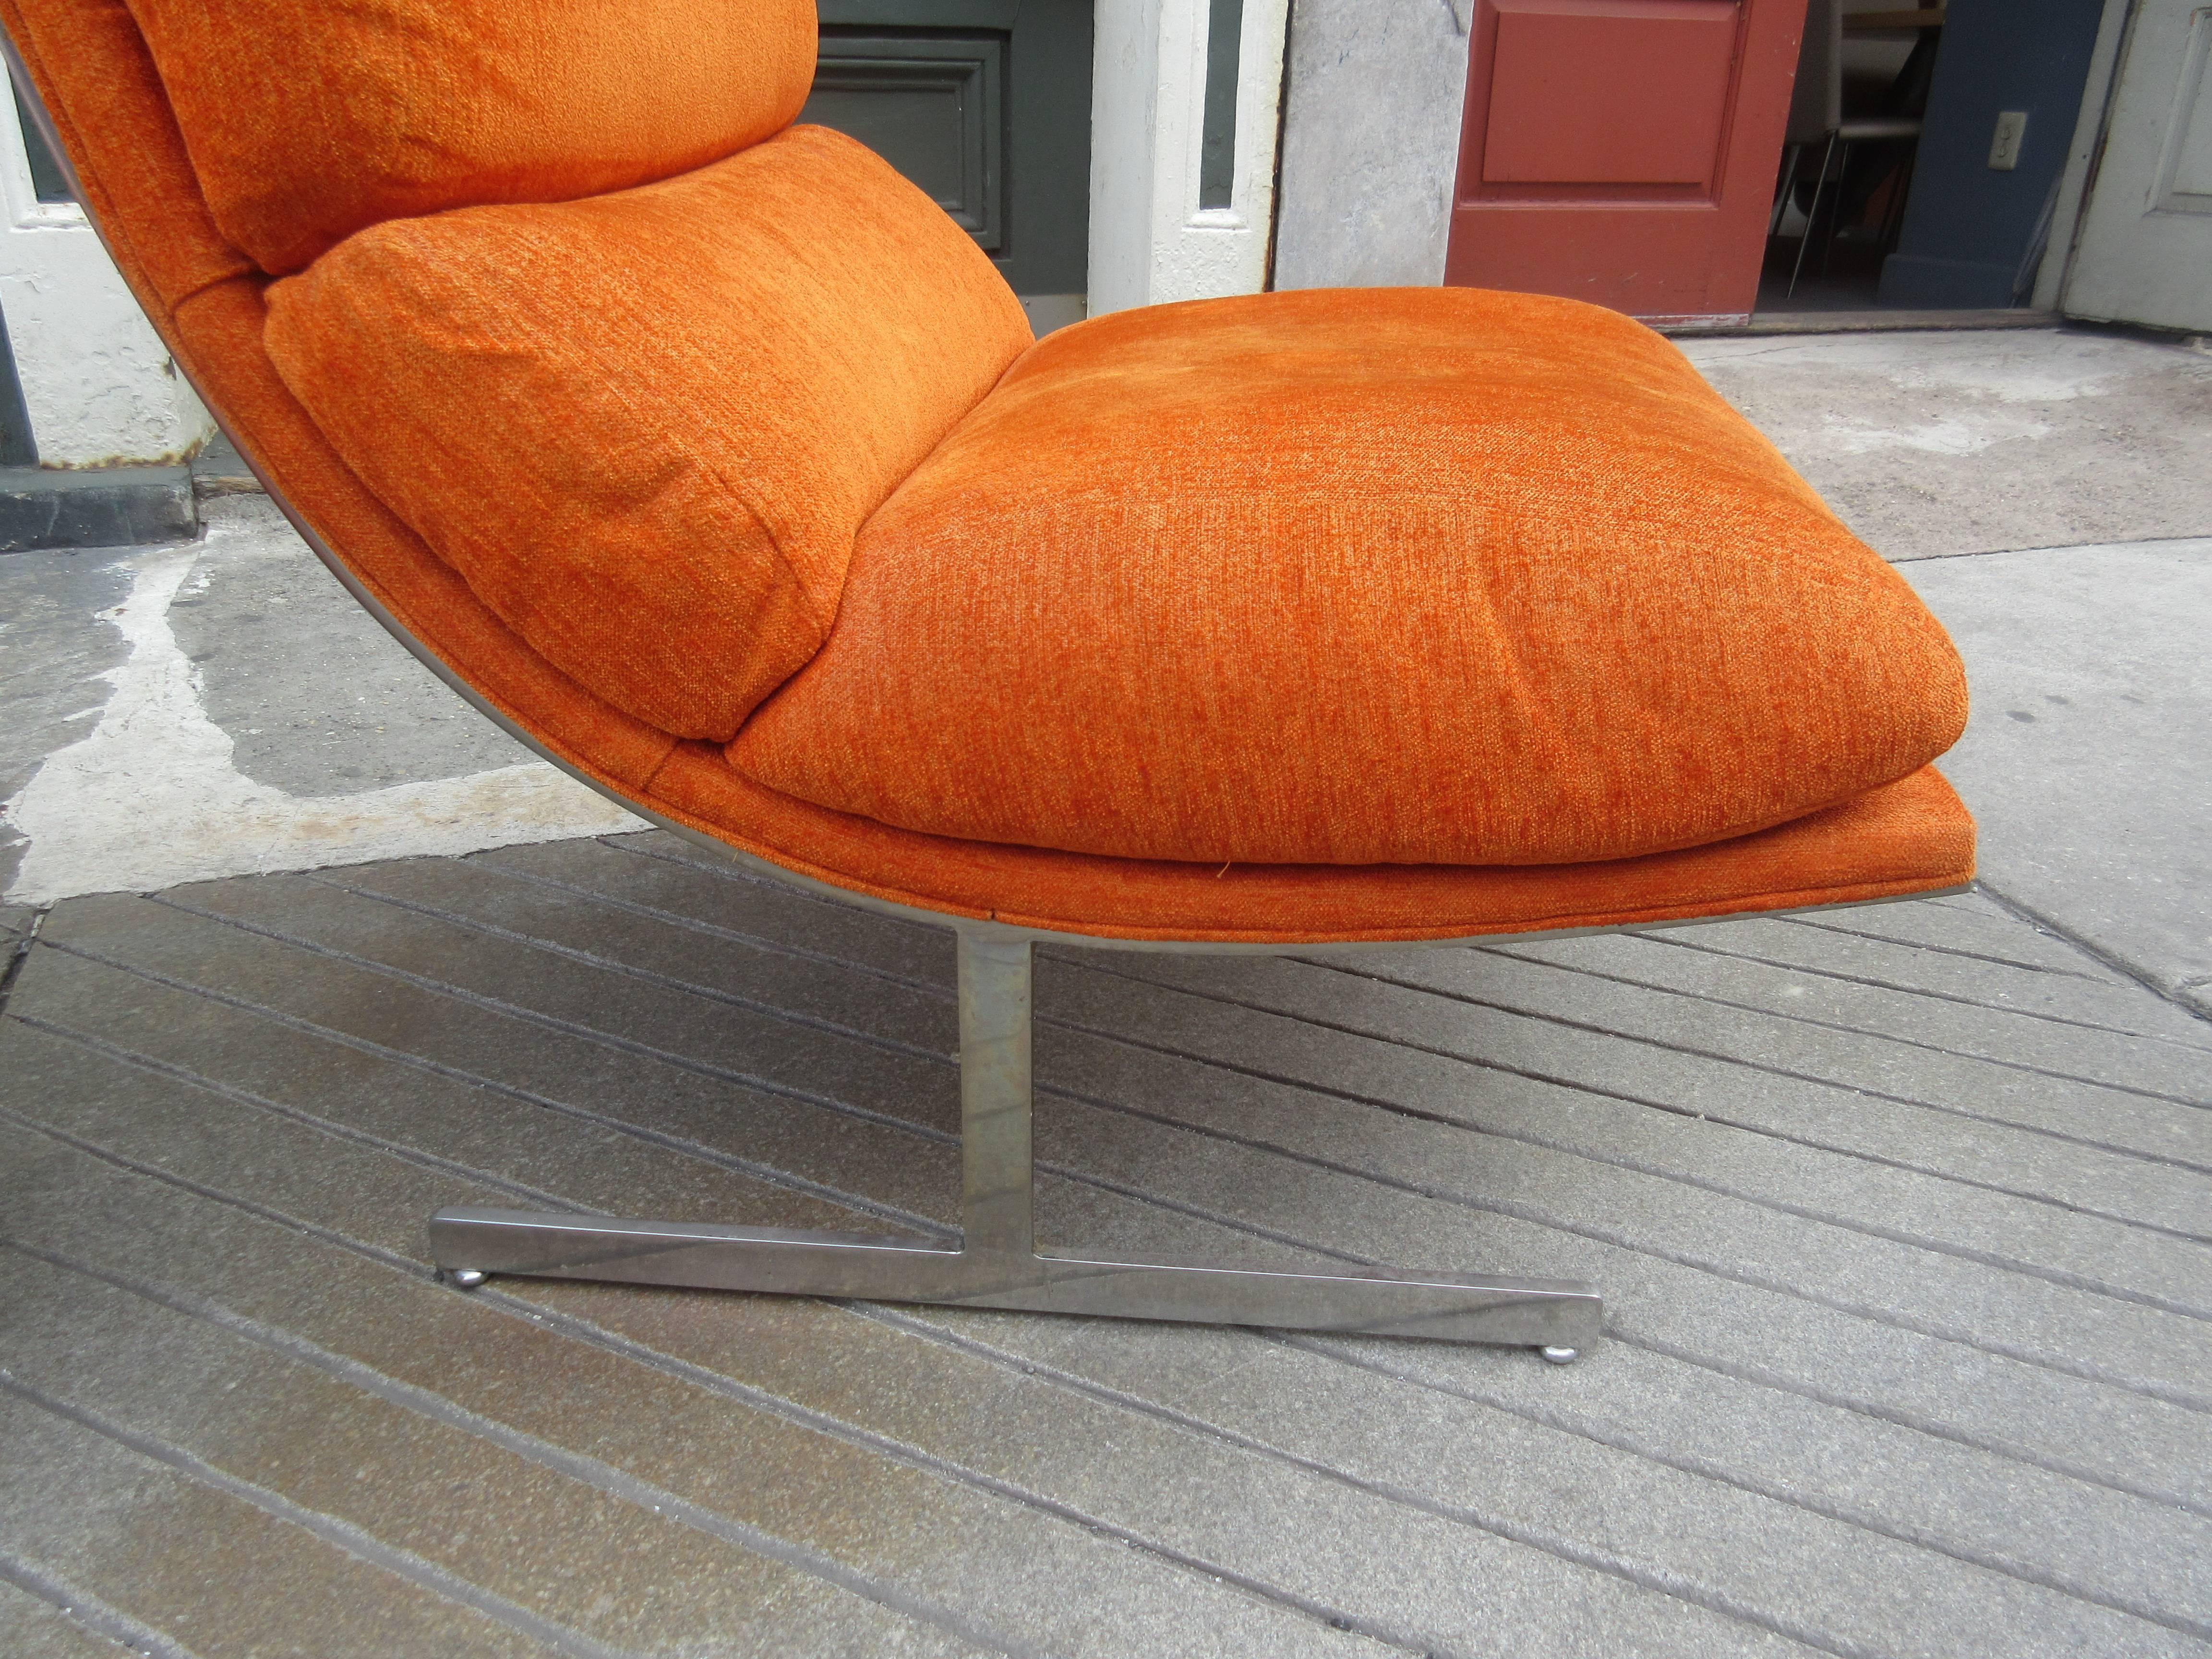 Pair of Milo Baughman for Thayer Coggin lounge chairs in original 1960s orange fabric with welded solid steel frames. Each chair has leveling pod feet and the original upholstery which is totally serviceable. Bought from original owner who decorated